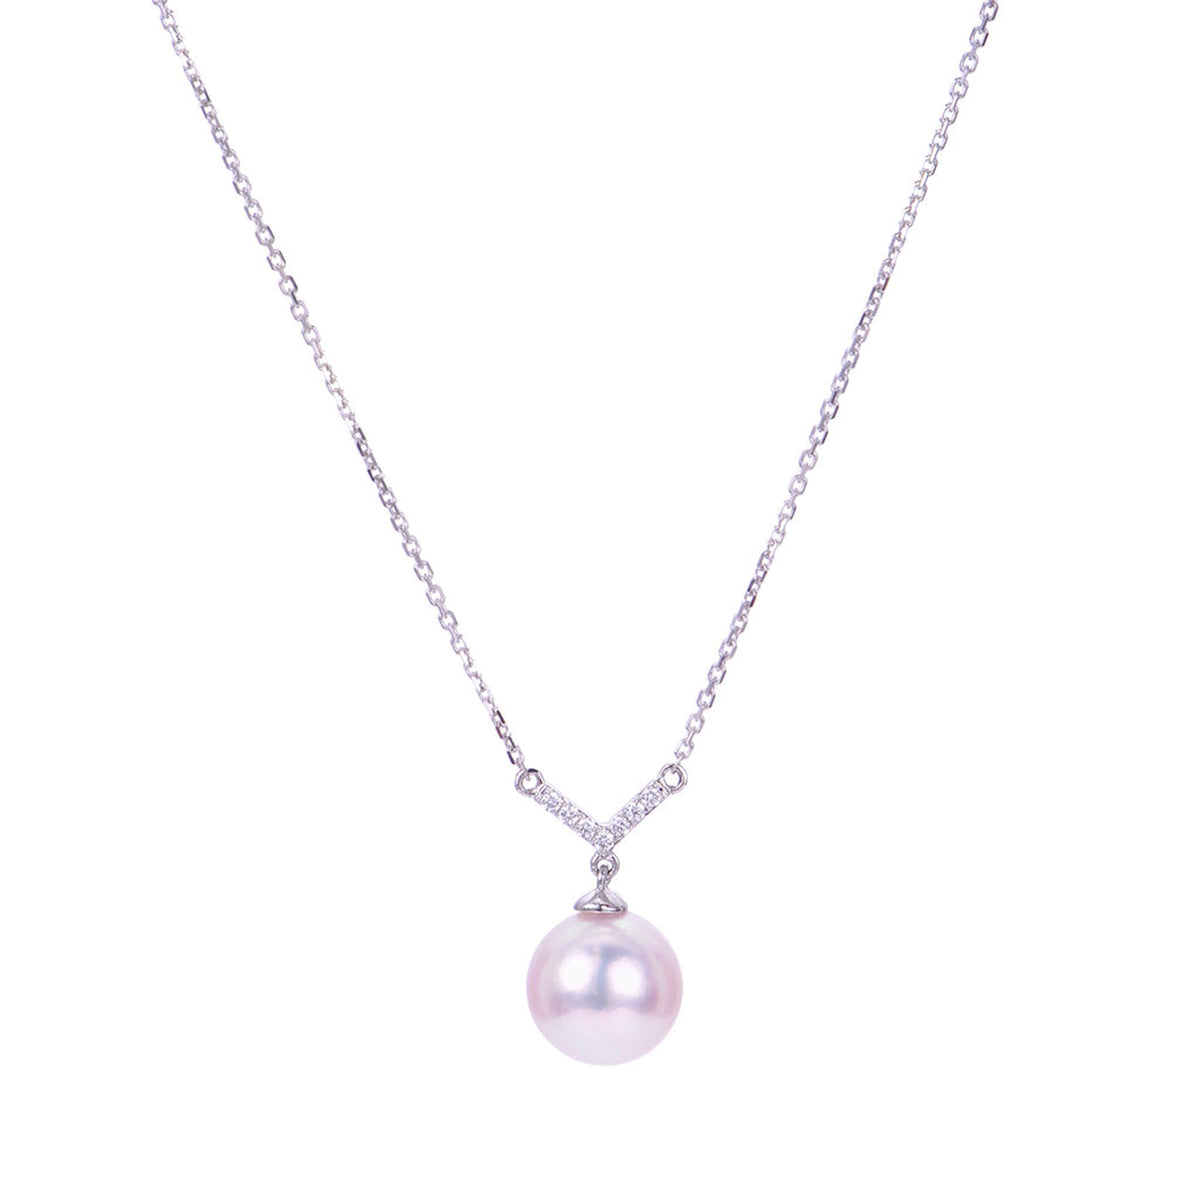 14Kt White Gold Drop Pendant With 8mm Akoya Cultured Pearl